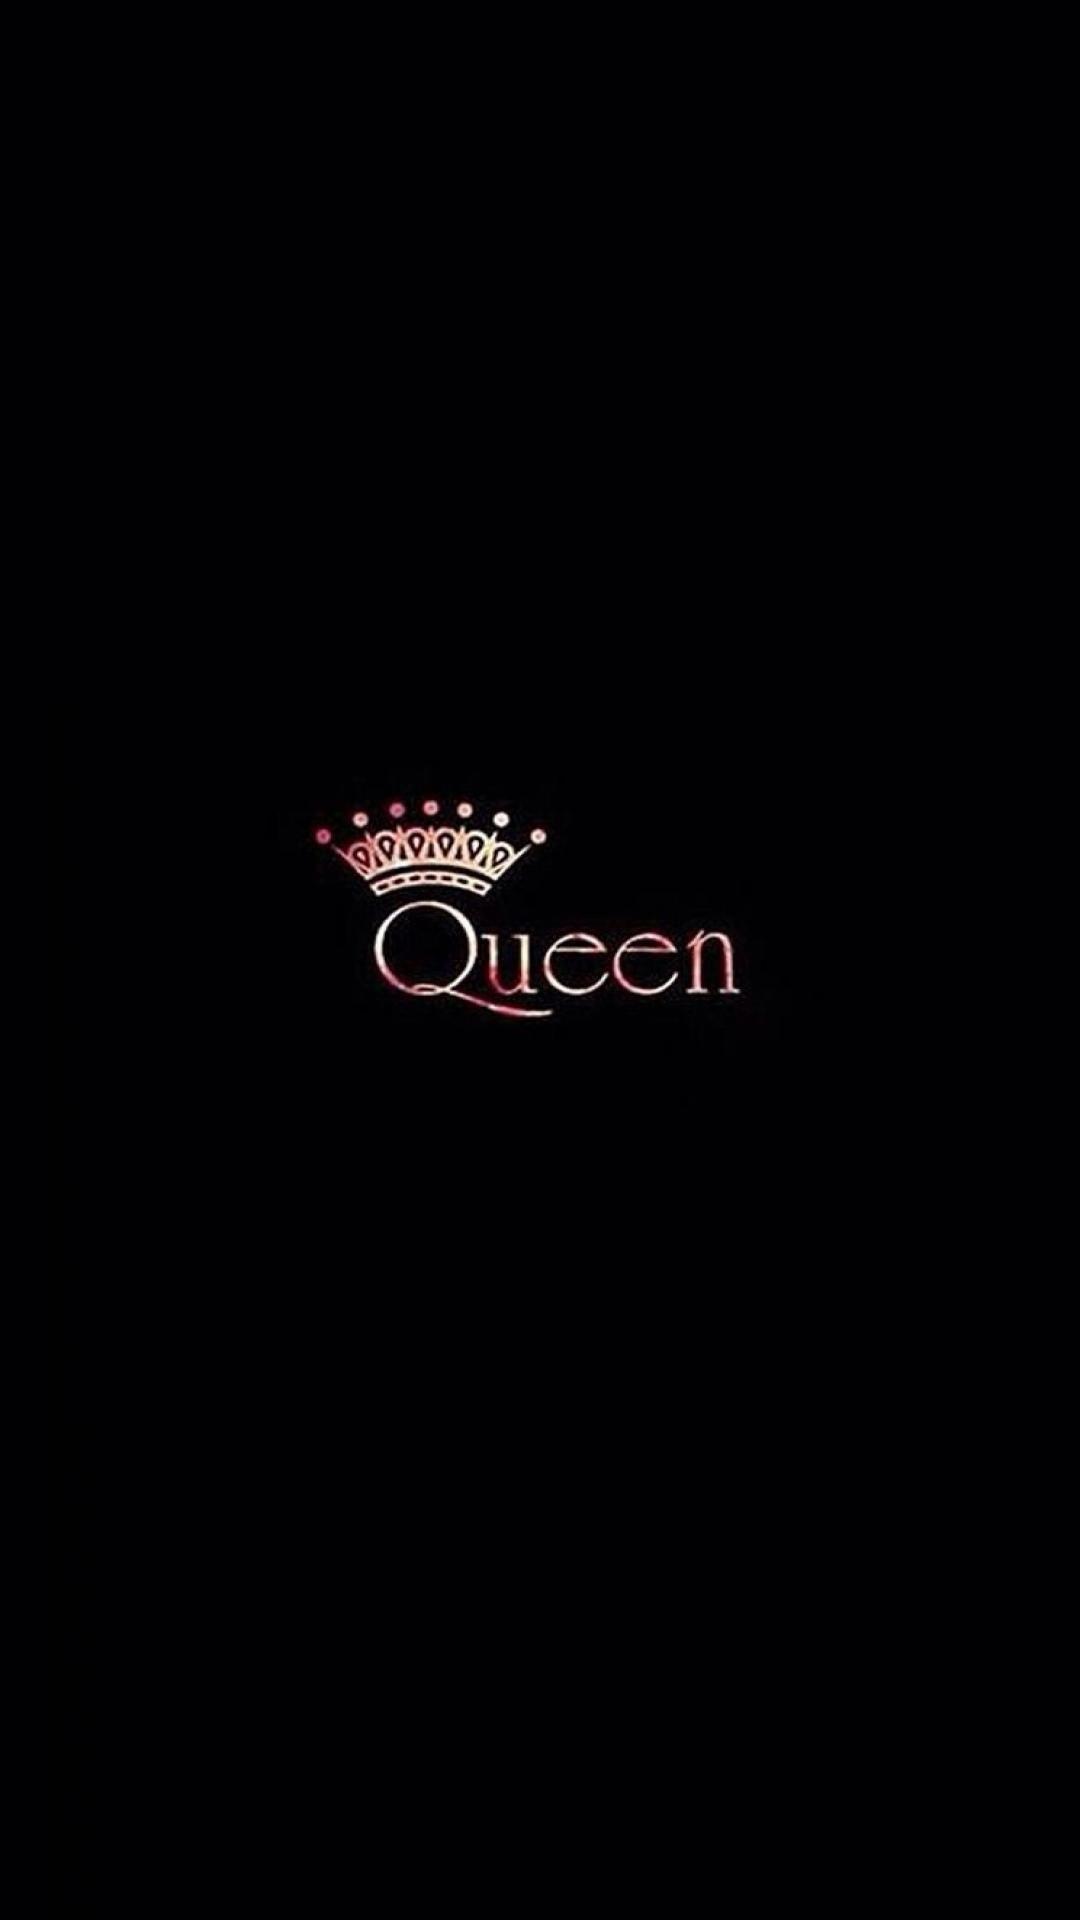 King And Queen Logos iPhone Wallpapers - Wallpaper Cave